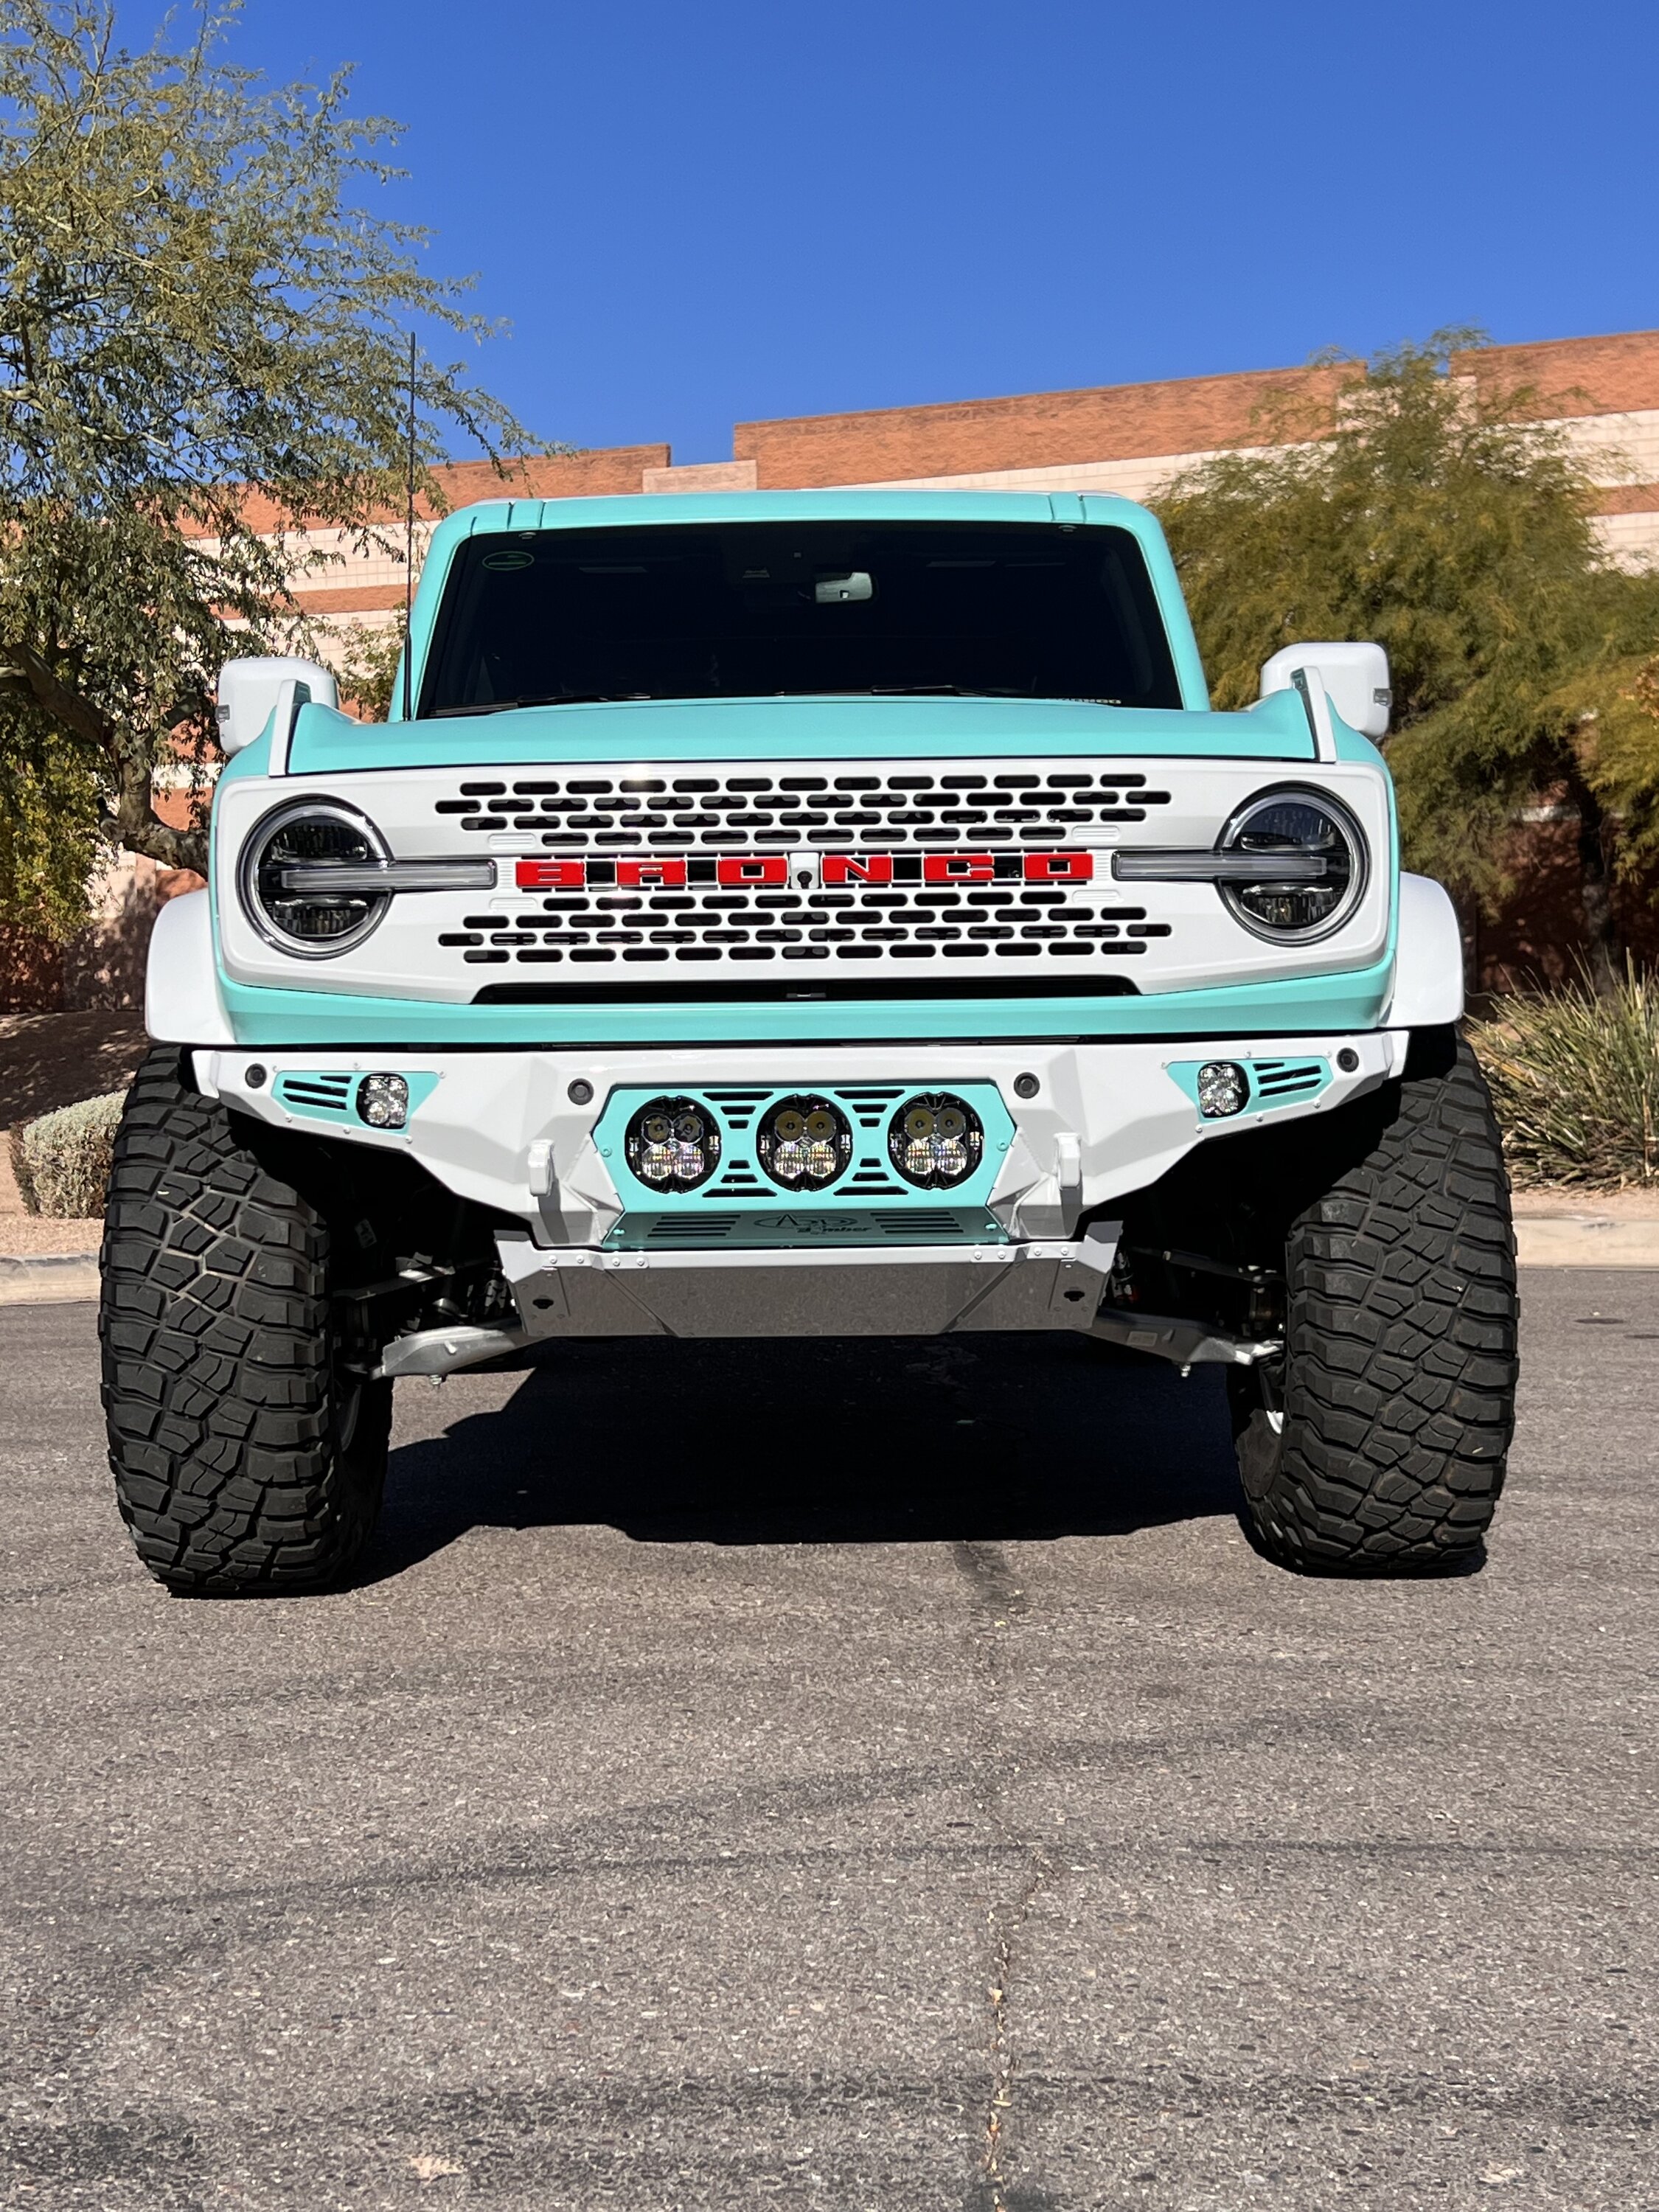 Ford Bronco Full color change: Tiffany paint on retro Bronco build by Doetsch Offroad IMG_0557